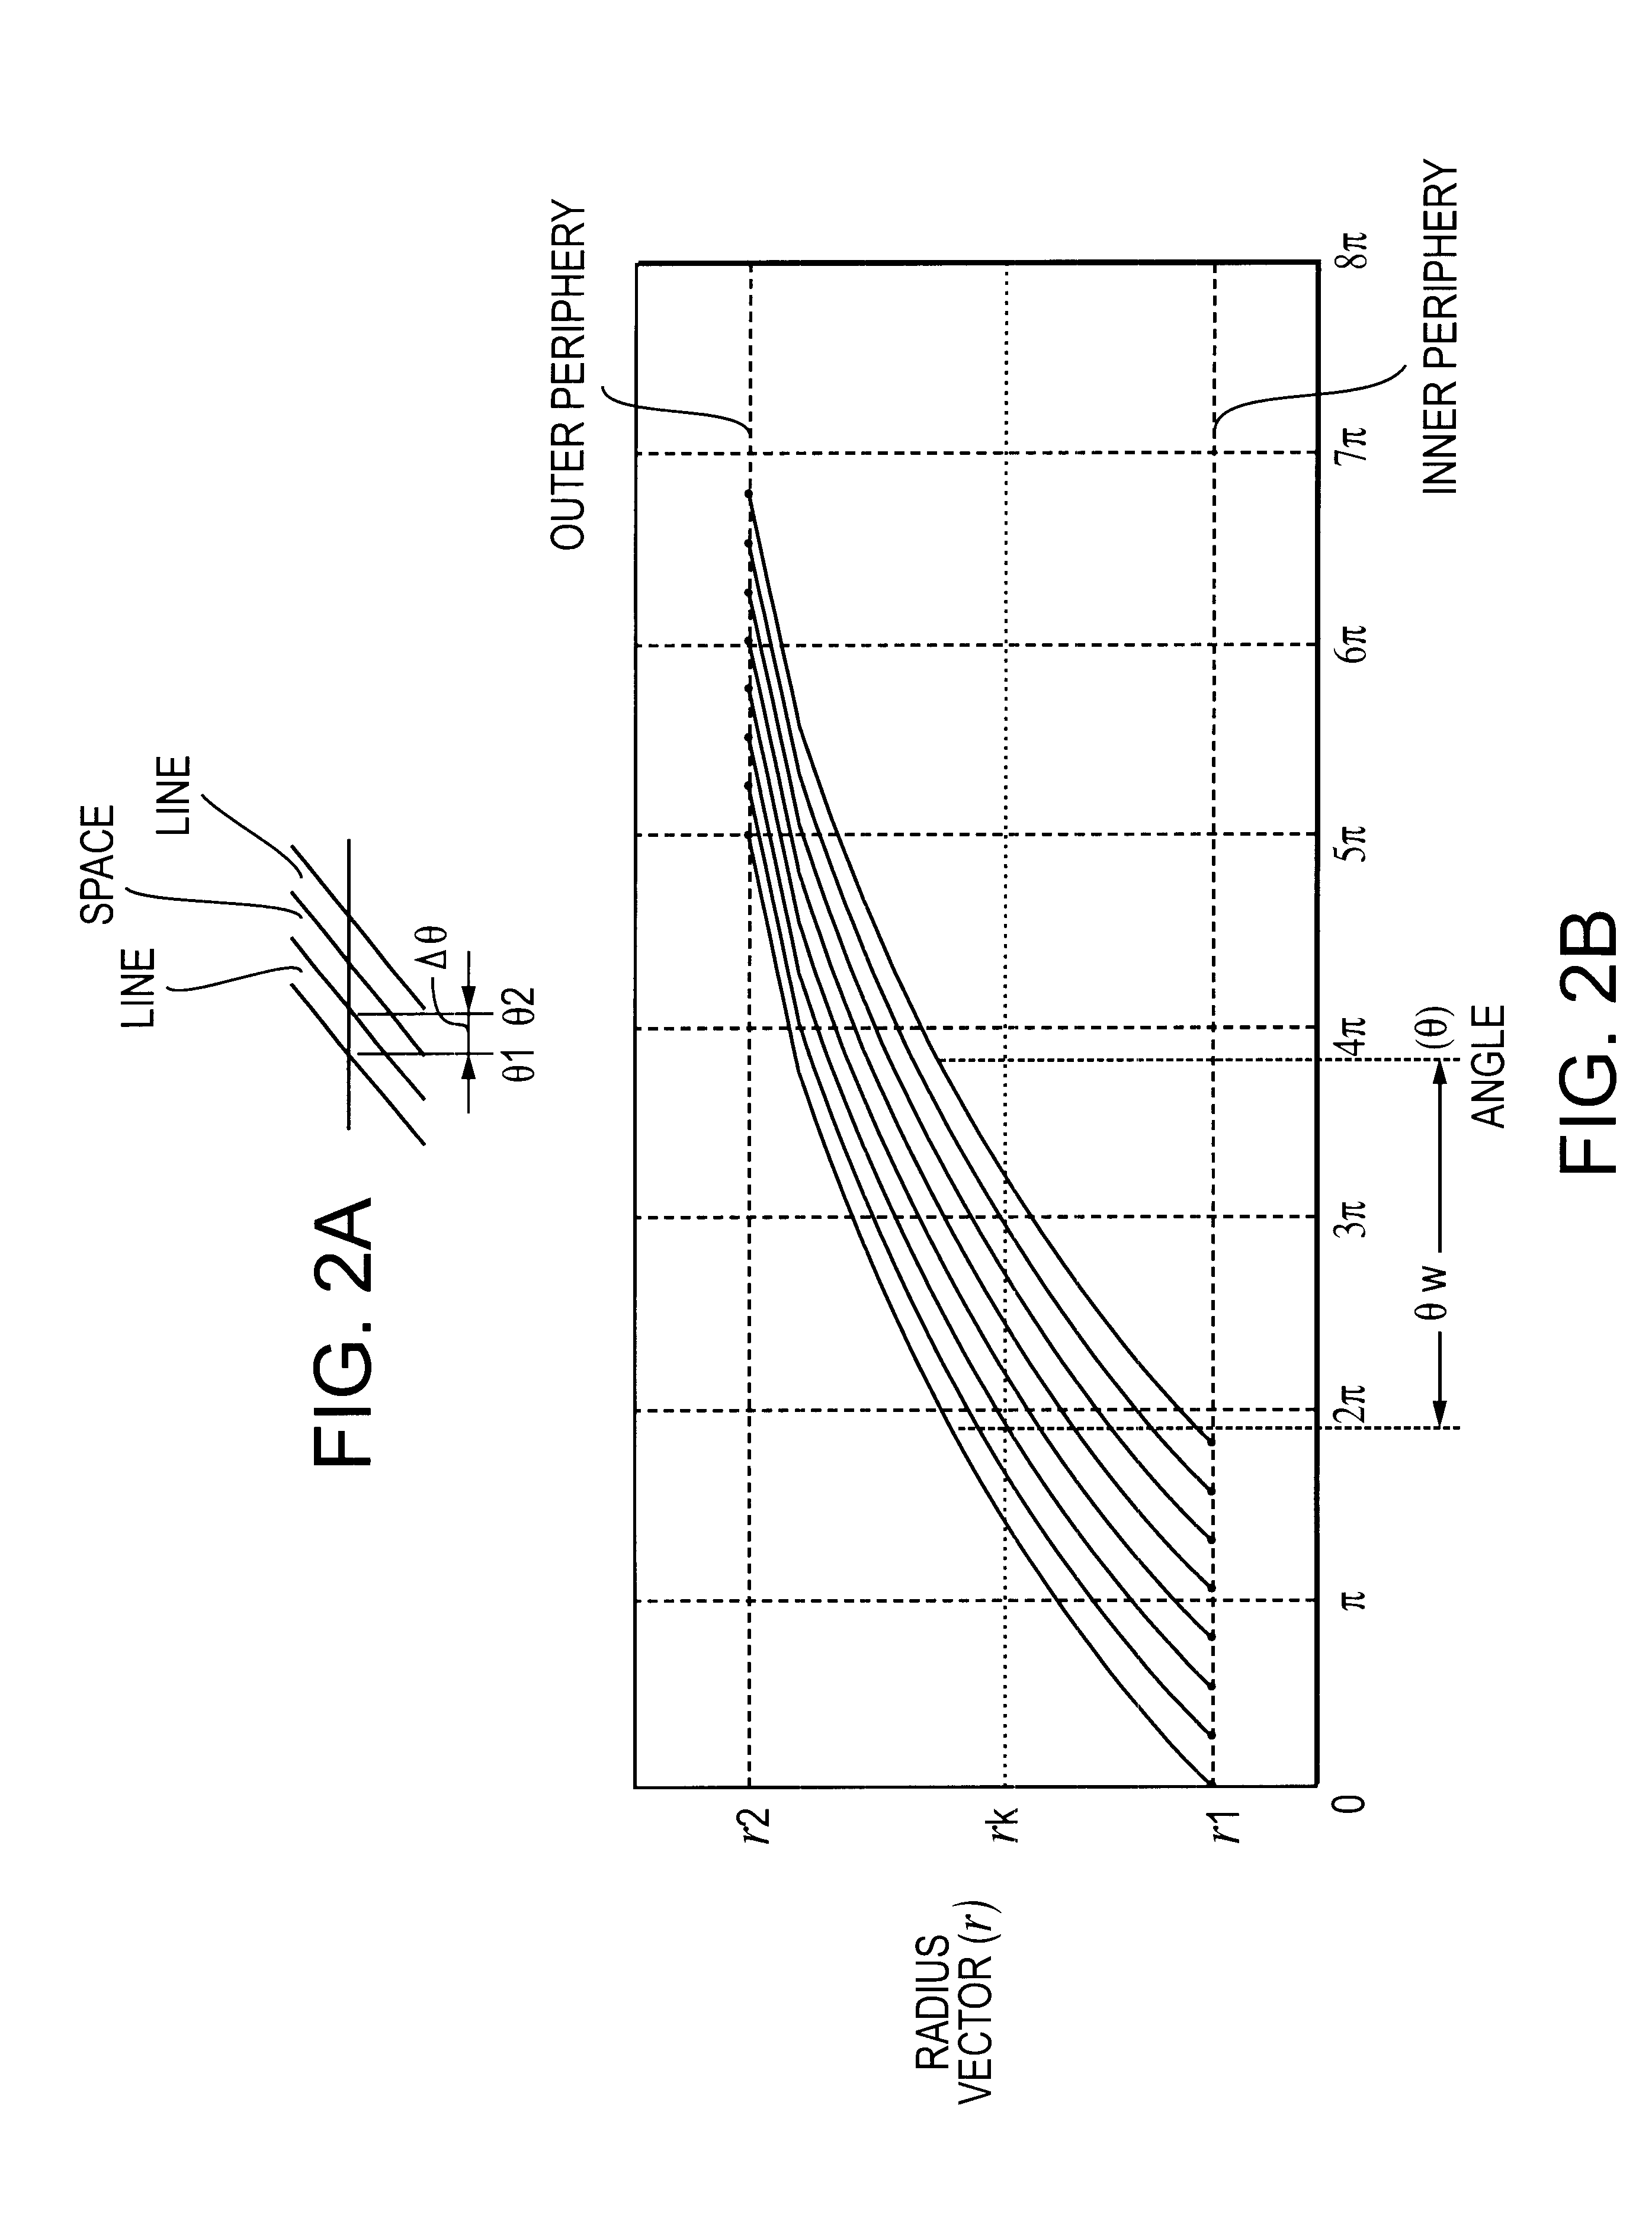 Filter, duplexer, and communication device